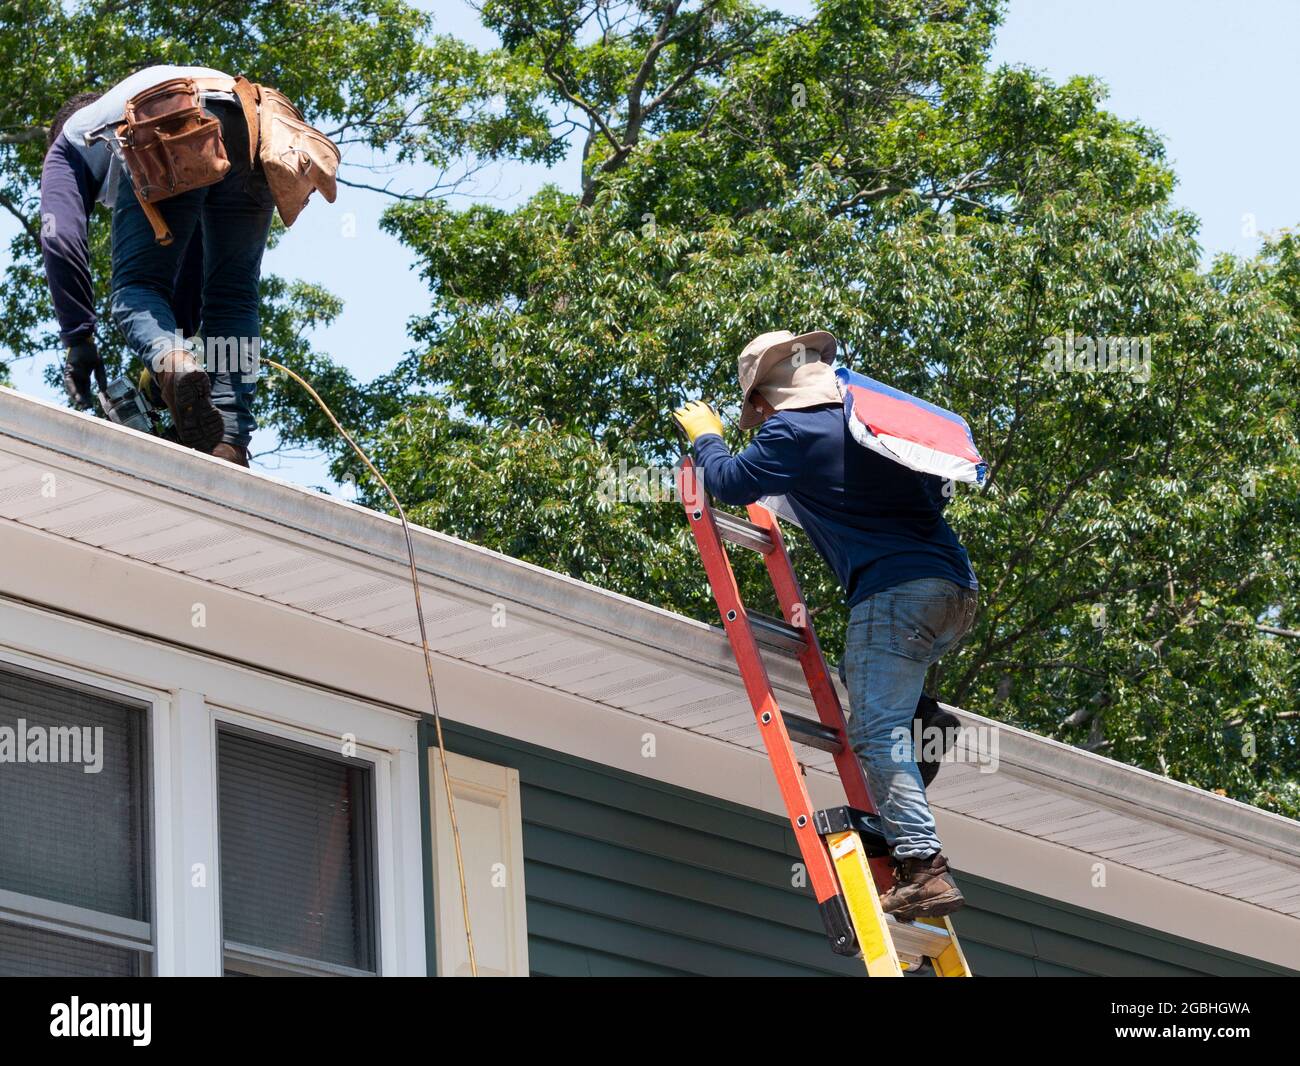 contractor climbing ladder with roof shingles while another nail the shingles on a residential house. Stock Photo